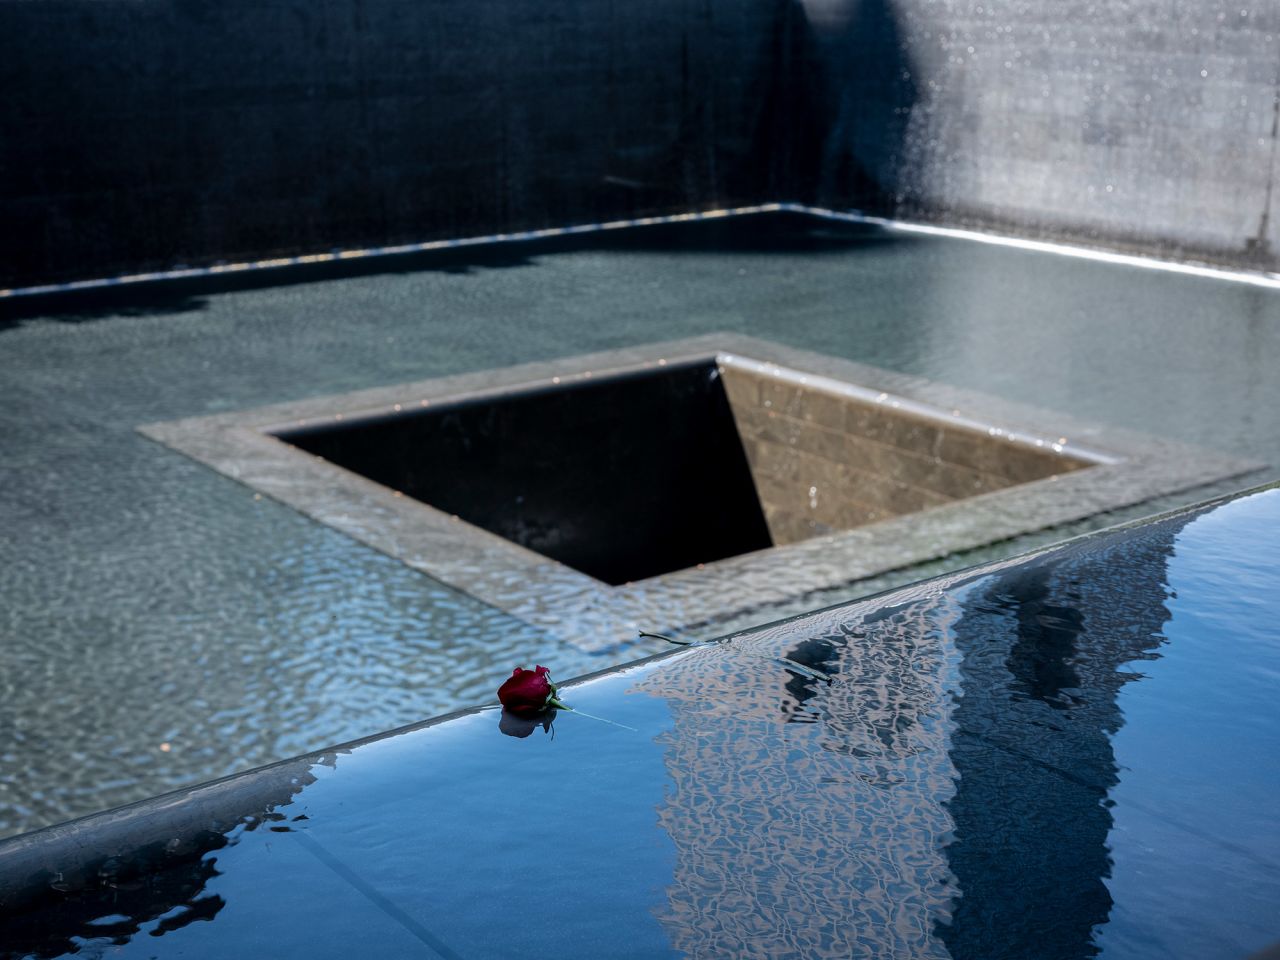 A flower is seen at the edge of one of the reflecting pools at the 9/11 memorial in New York.